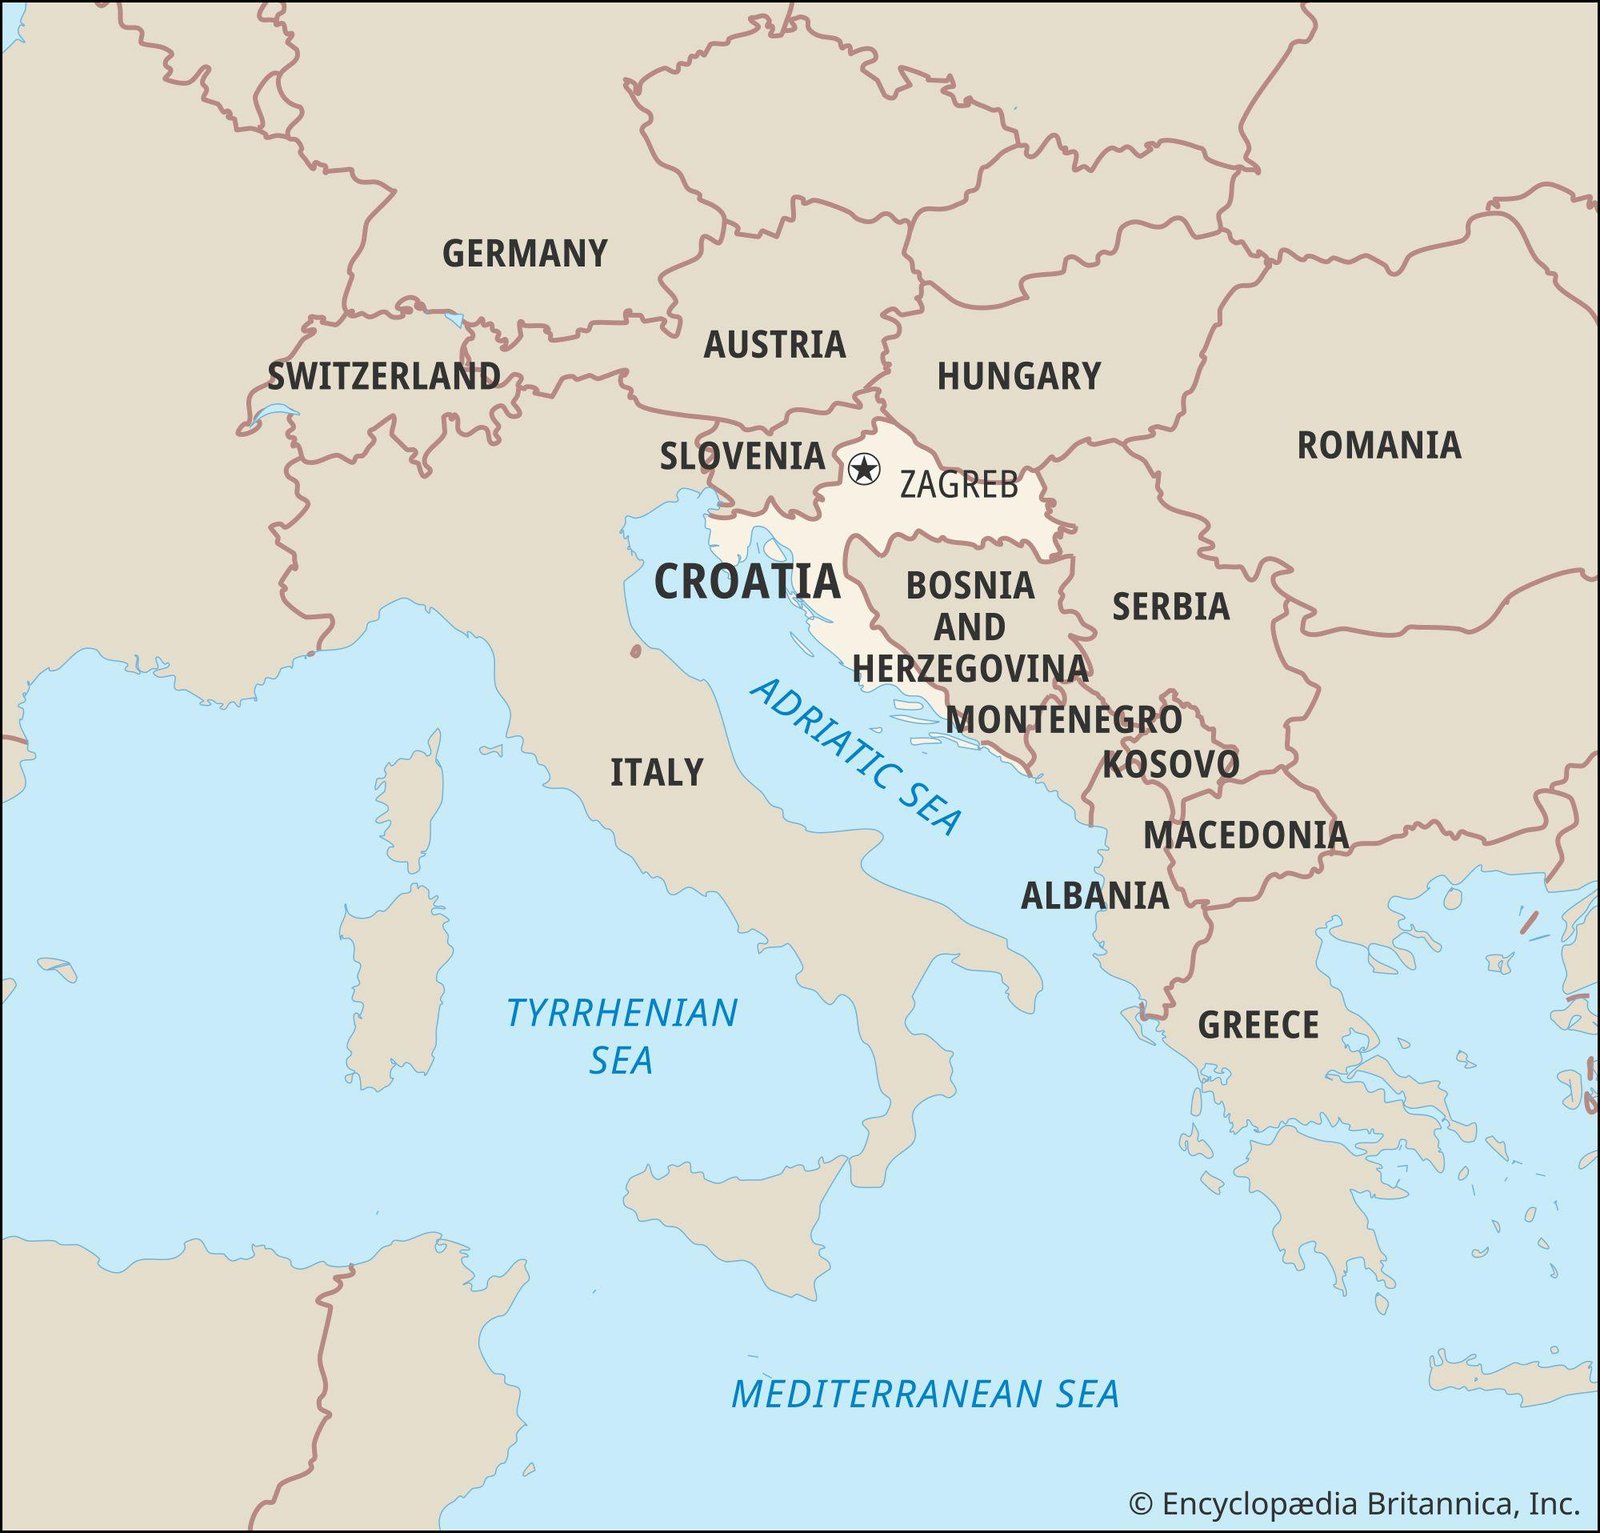 Overview of Croatia's Geography and Climate